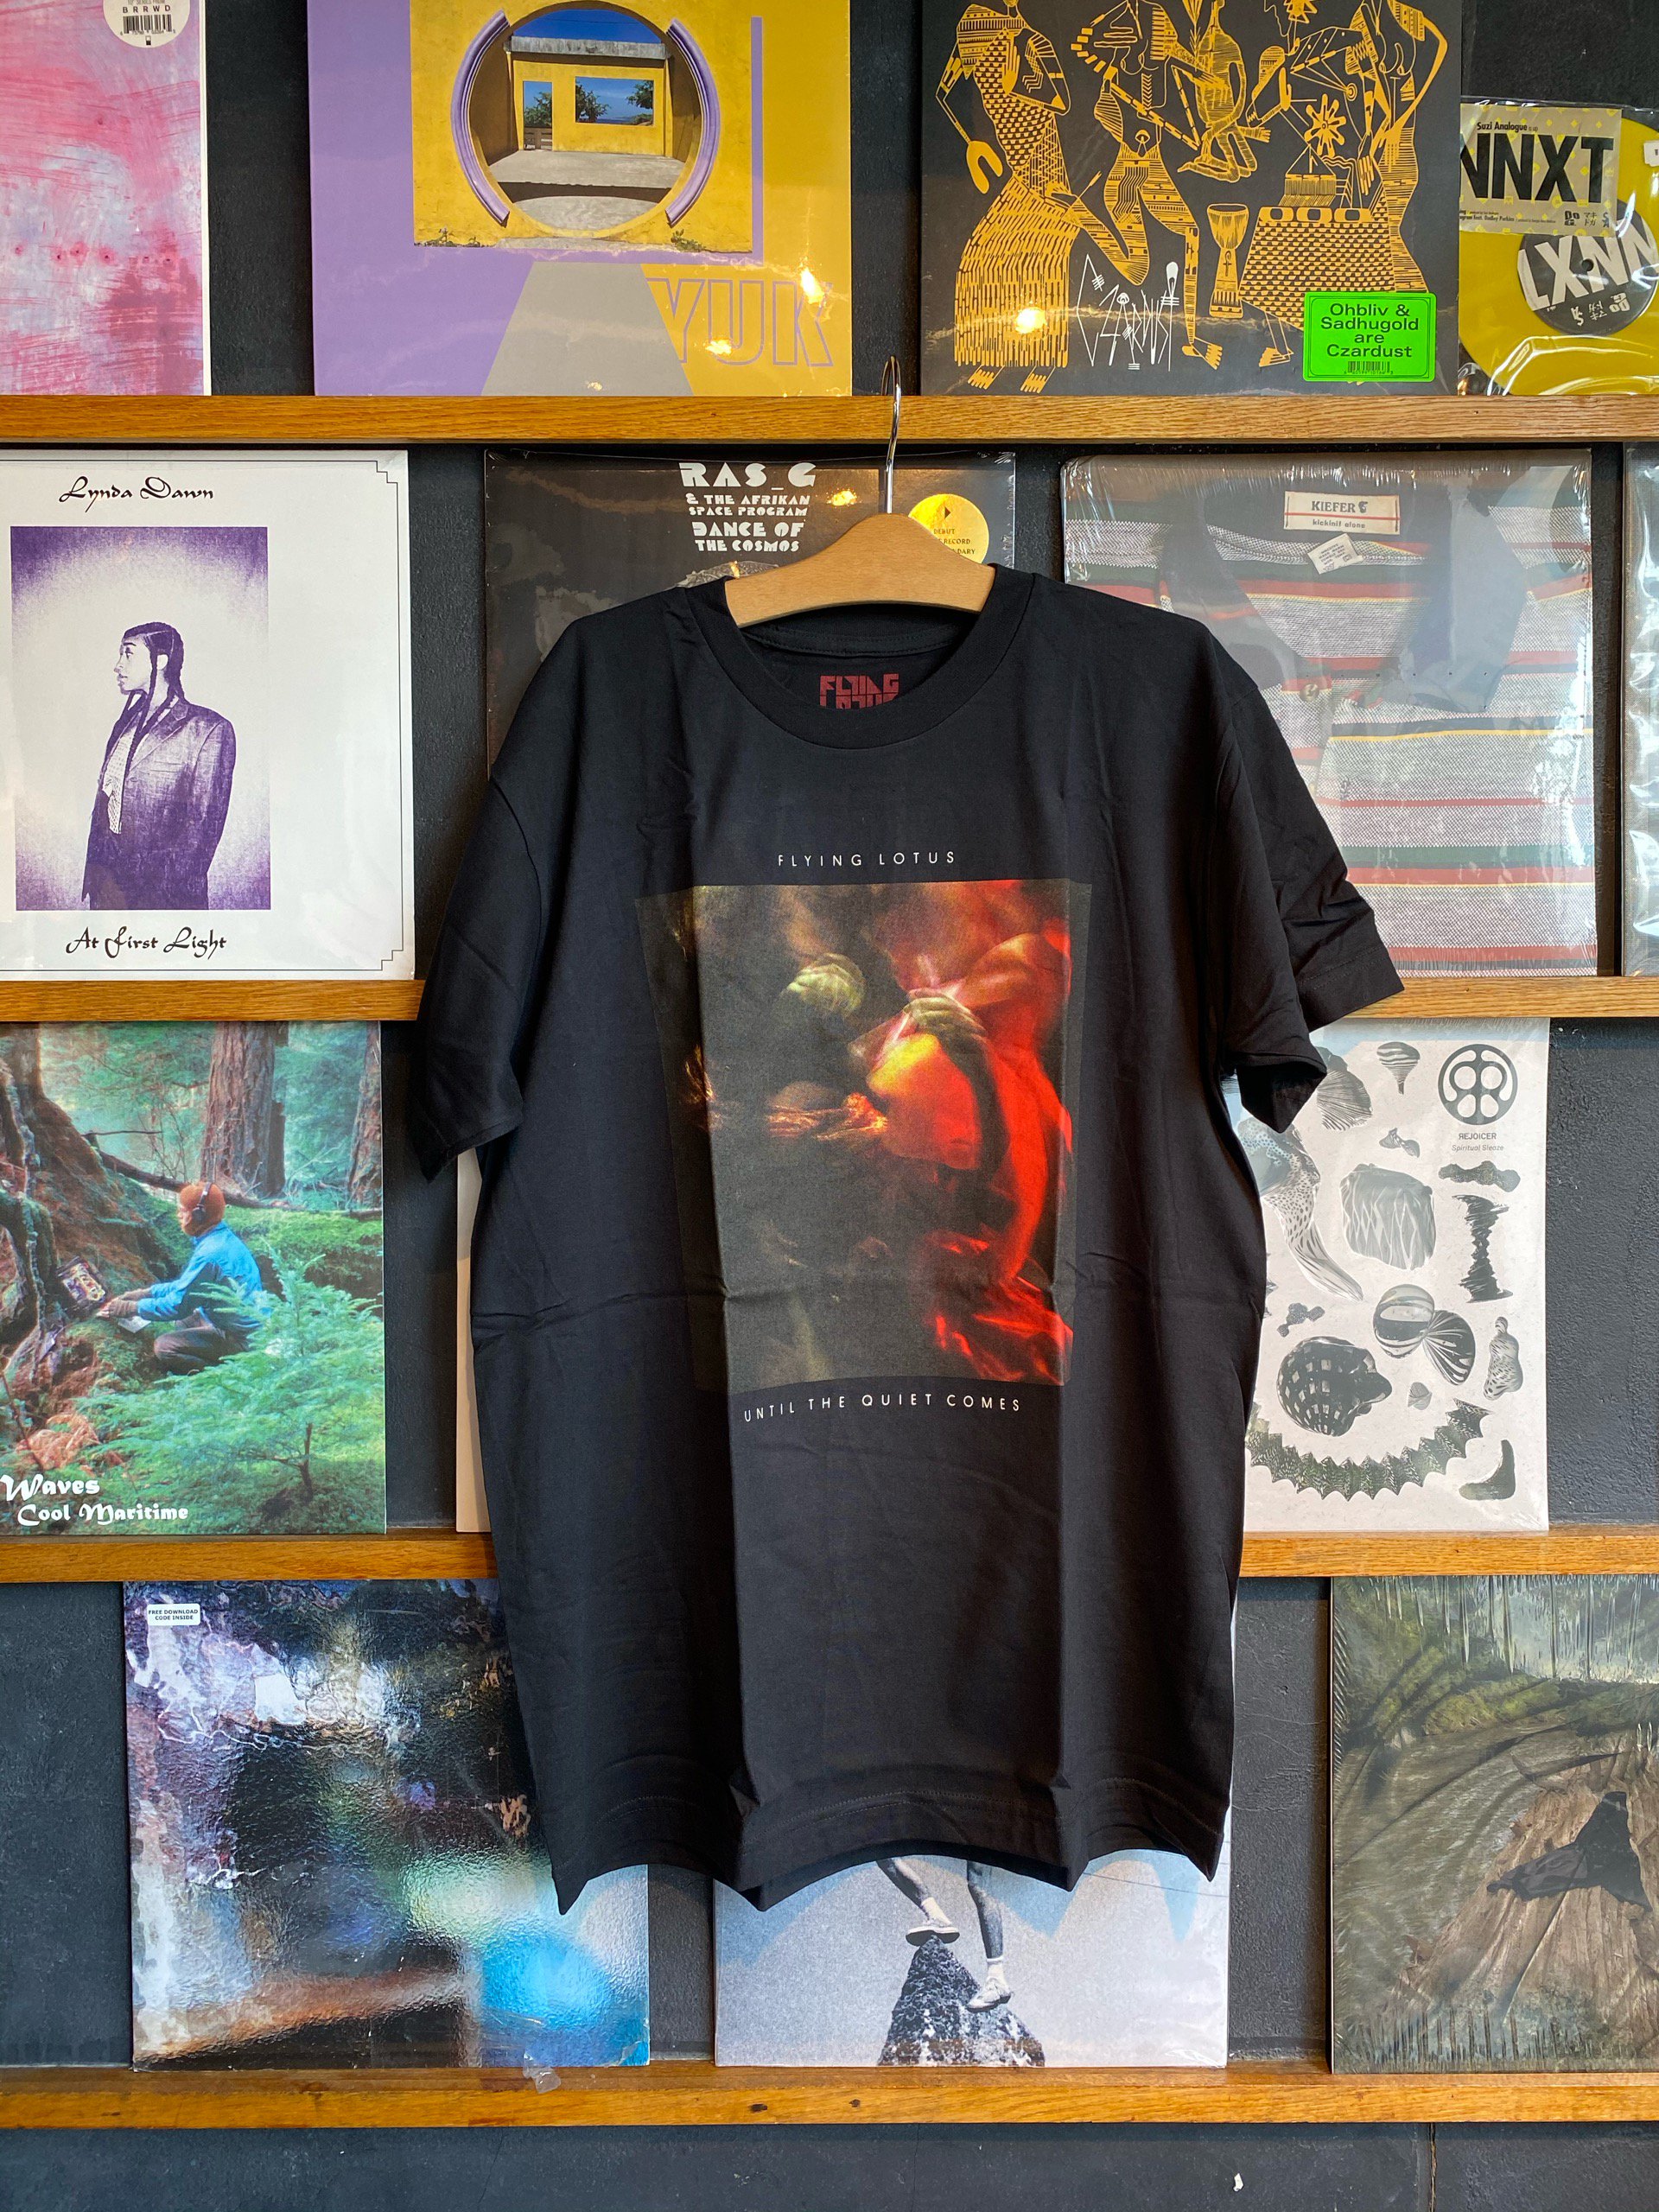 BRAINFEEDER/flying lotusUntil the Quiet Comes T shirts